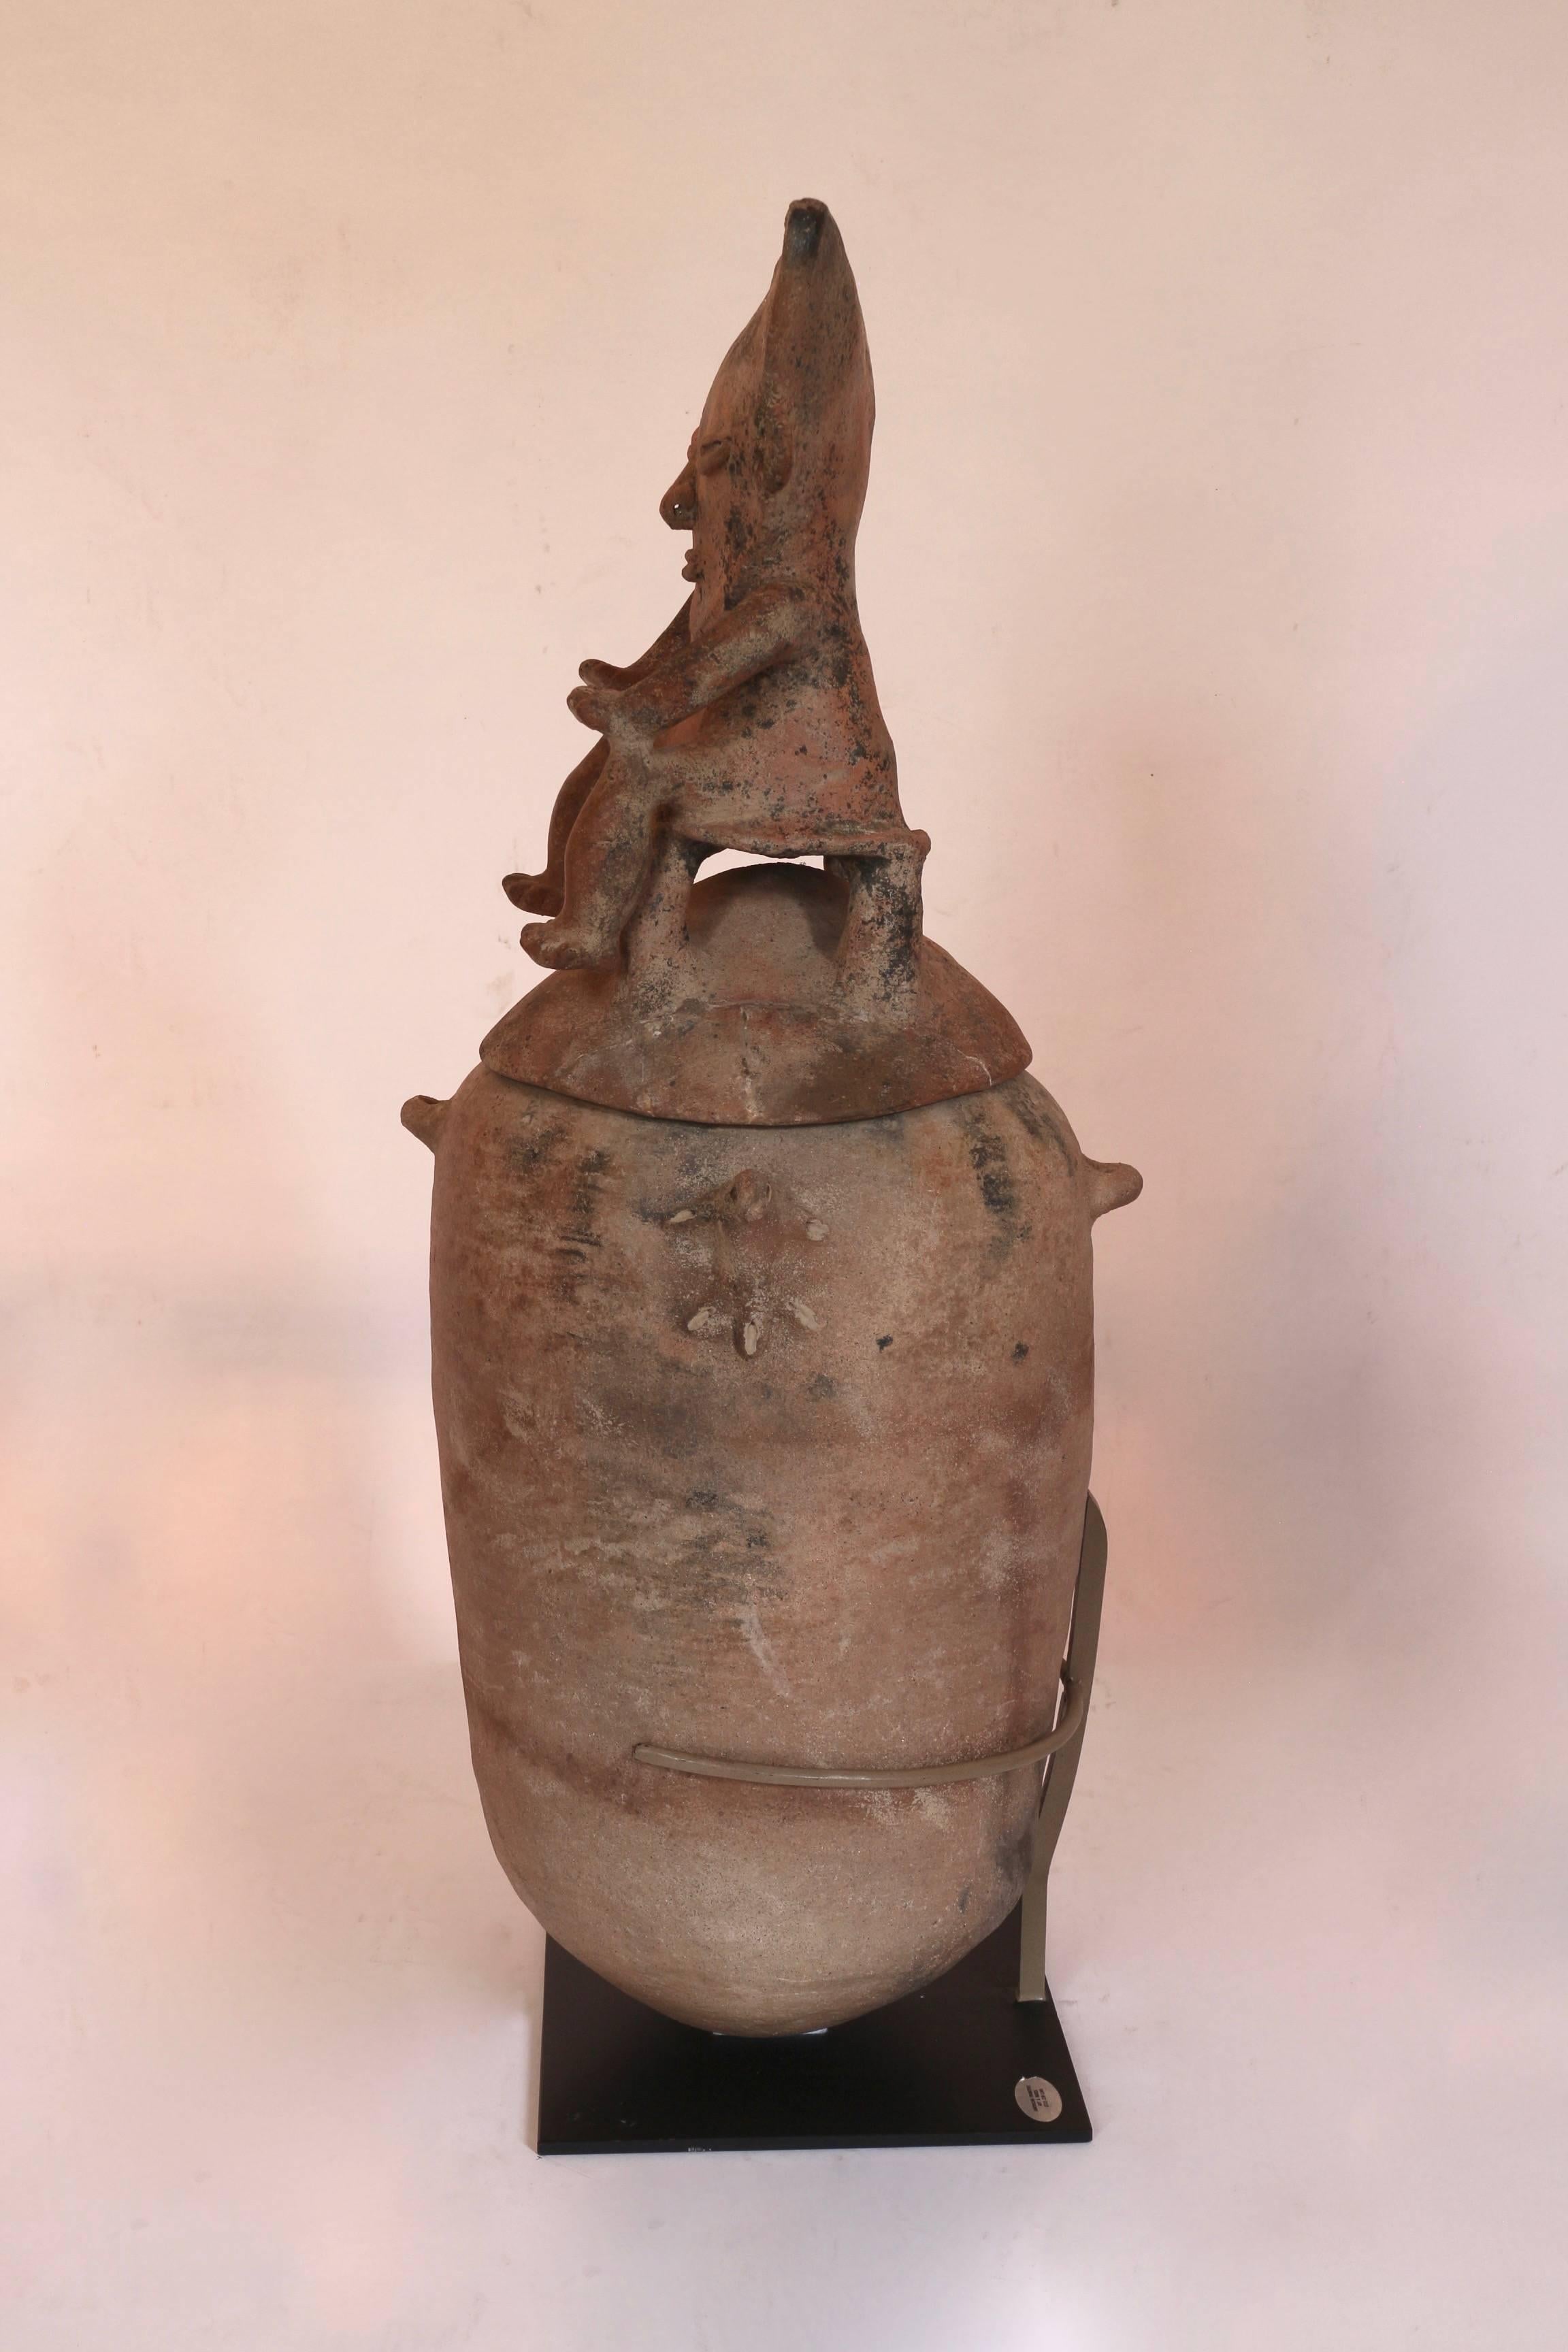 Terracotta urn from Rio Magdalena 
Certificate by S. Grussenmeyer, sold to private collector in 1991.